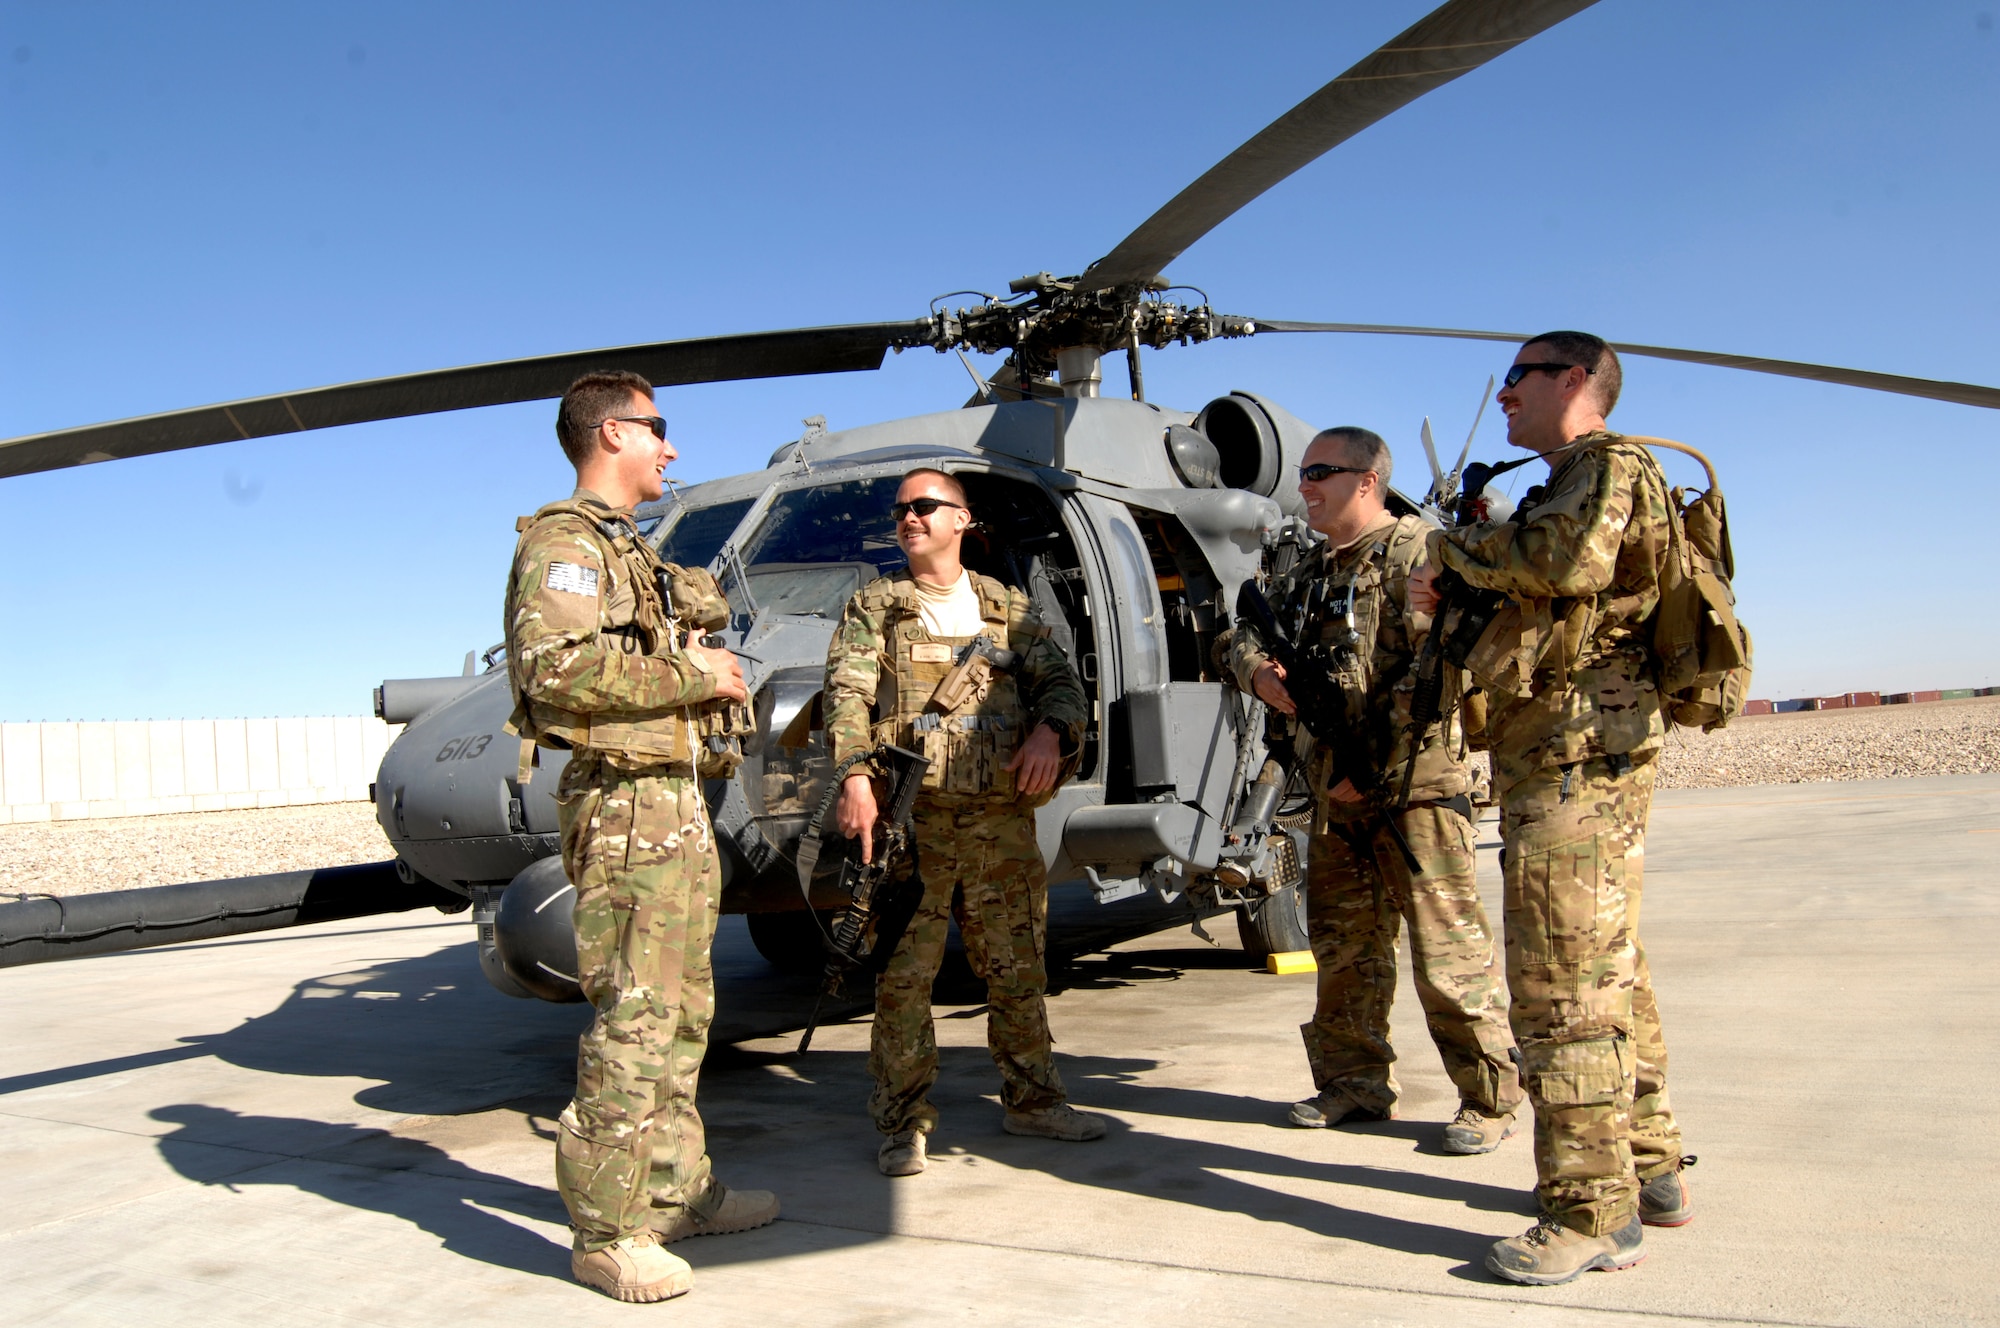 (From left) U.S. Air Force Capt. Shaun Cullen, Capt. Tripp Zanetis, Tech. Sgt. Jim Denniston and Tech. Sgt. Erick Pound are all members of the 101st Rescue Squadron, New York Air National Guard, currently assigned to the 26th Expeditionary Rescue Squadron, take turns “busting each other’s chops,” following shift-change at Camp Bastion, Afghanistan Nov. 29. They are all firefighters when not activated. Cullen, the aircraft commander, is assigned to Engine 54, in Midtown Manhattan; Zanetis, the copilot, is assigned to Ladder 11 in Lower East Manhattan; Pound, the aerial gunner, is assigned to Engine 58 in Harlem; and Denniston, the flight engineer, is assigned to Engine 285 in Queens. Together at the 26th ERQS, the team makes-up Pedro 24, a quick-response HH-60 Pave Hawk medical evacuation crew. (U.S. Air Force photo/Master Sgt. Russell Martin)